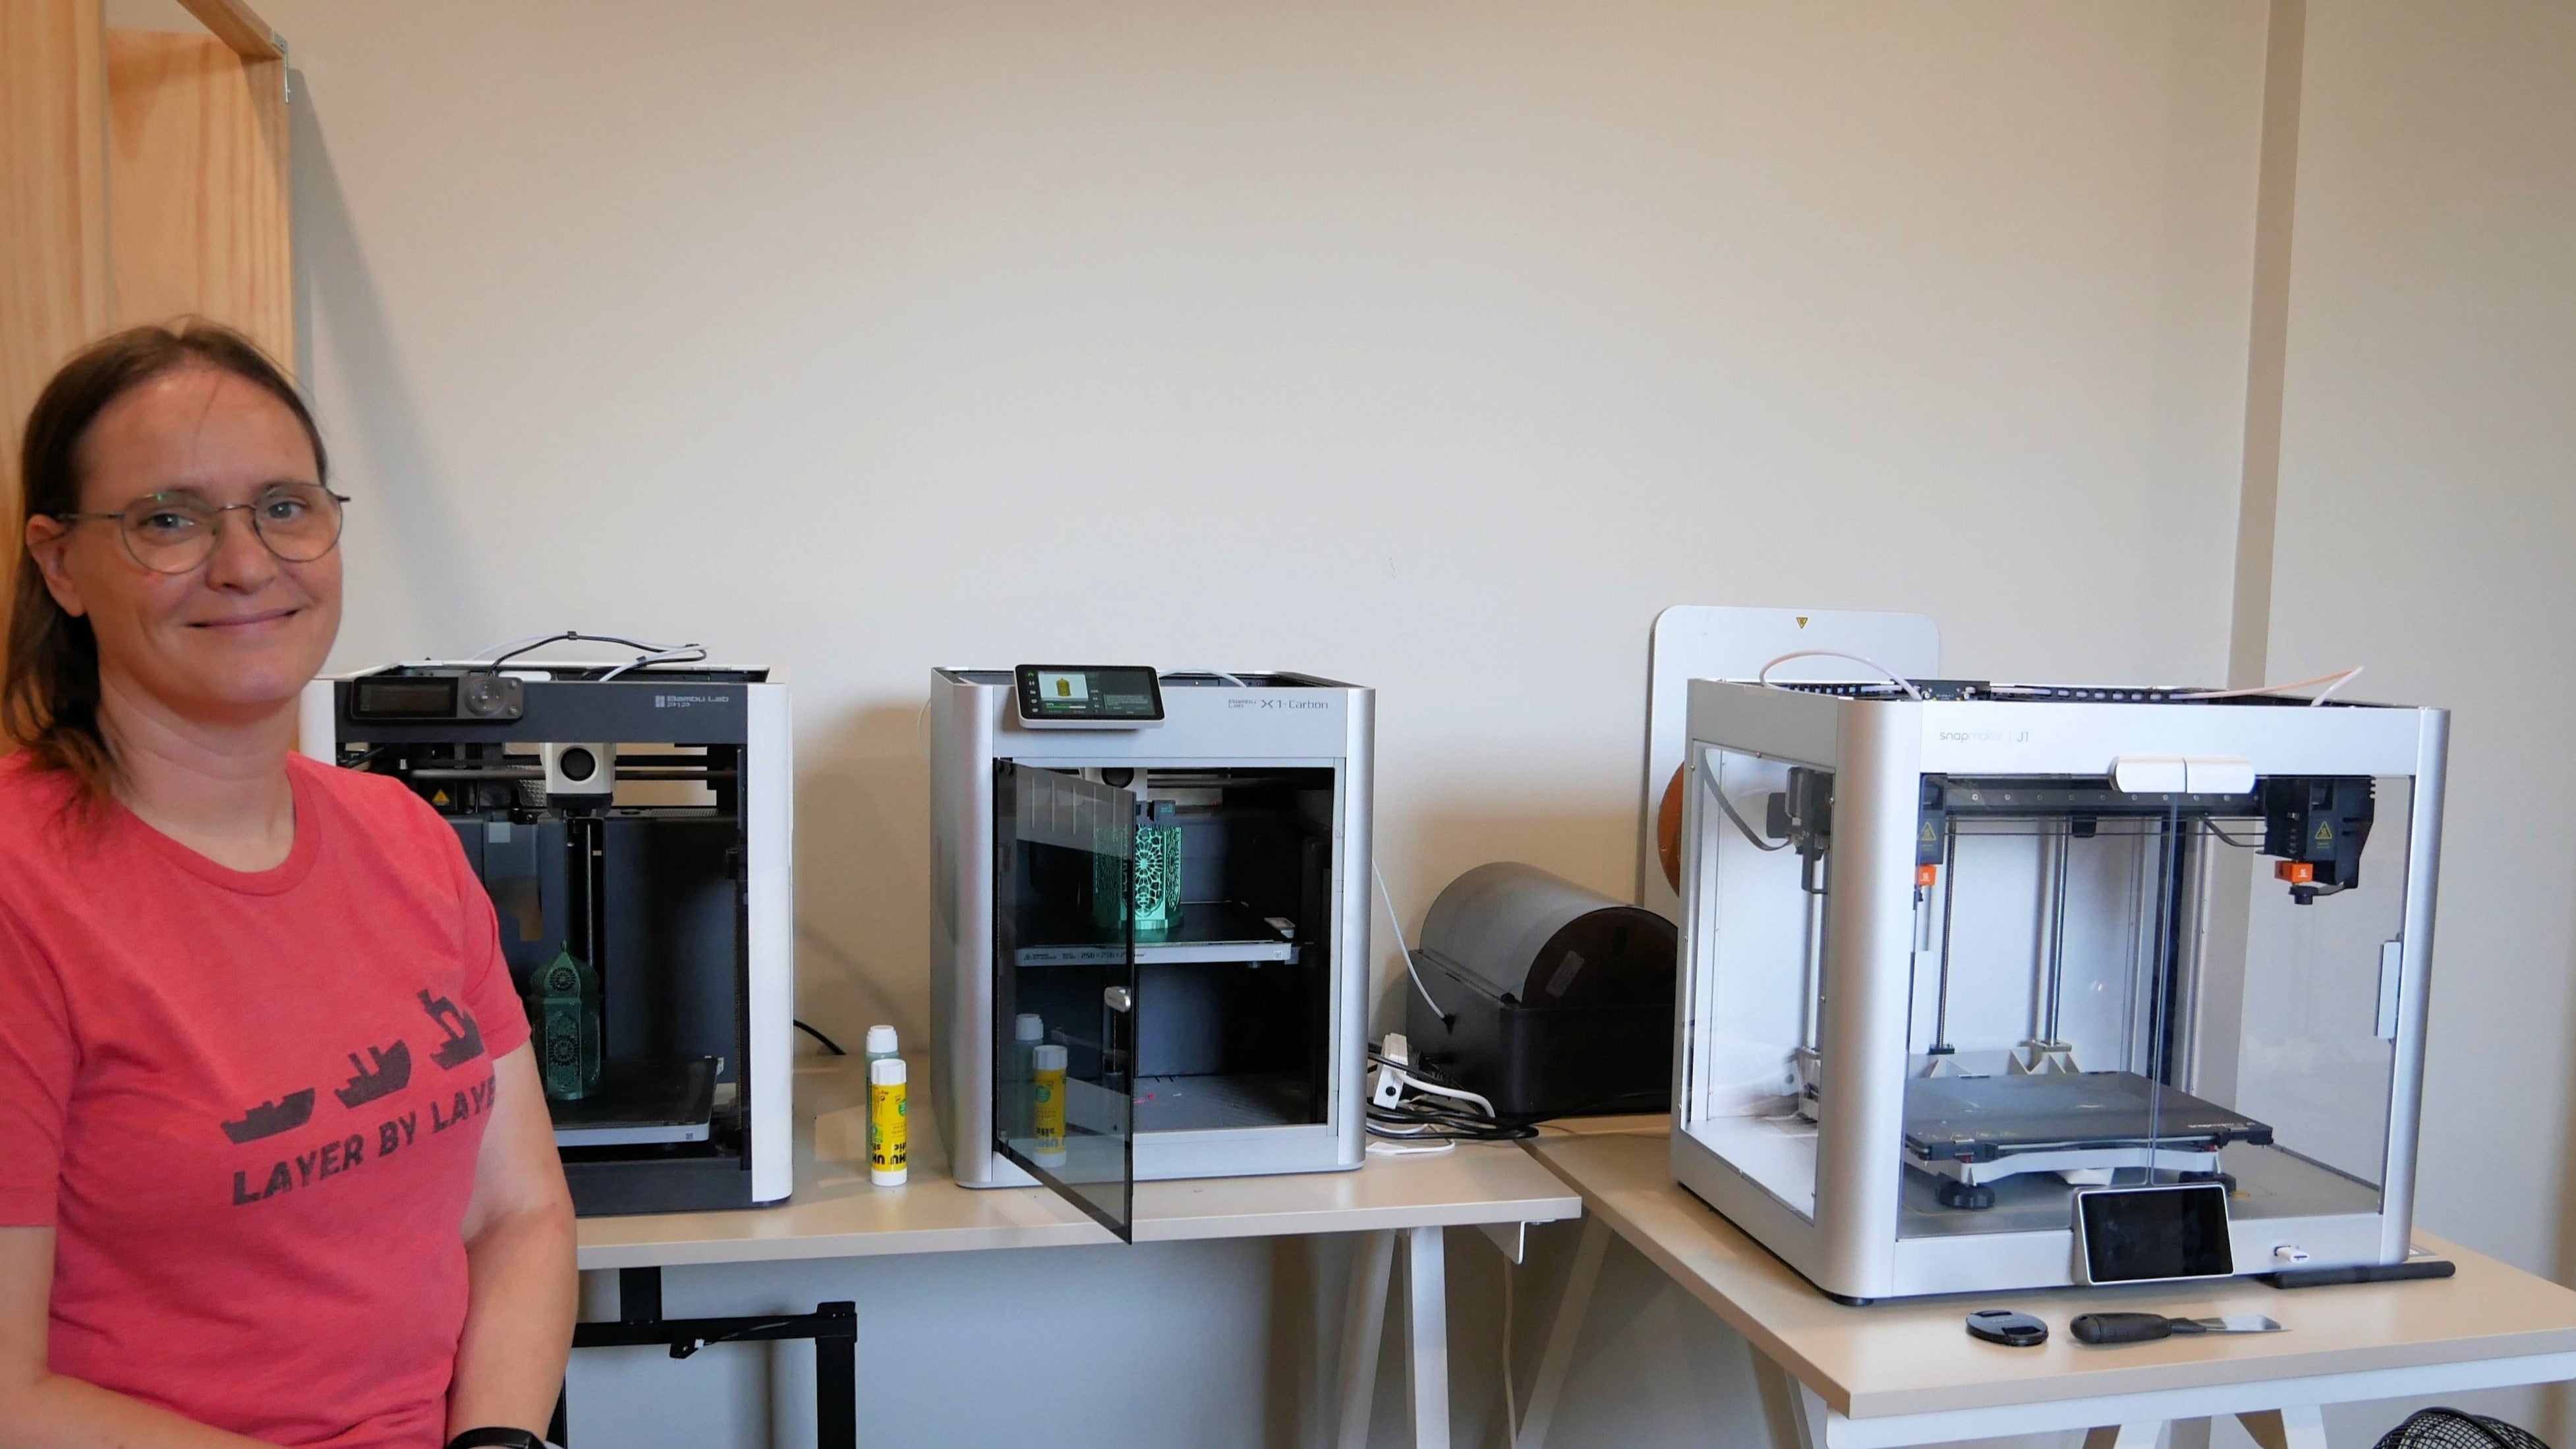 Natalie with the new additions to her collection of 3D printers.